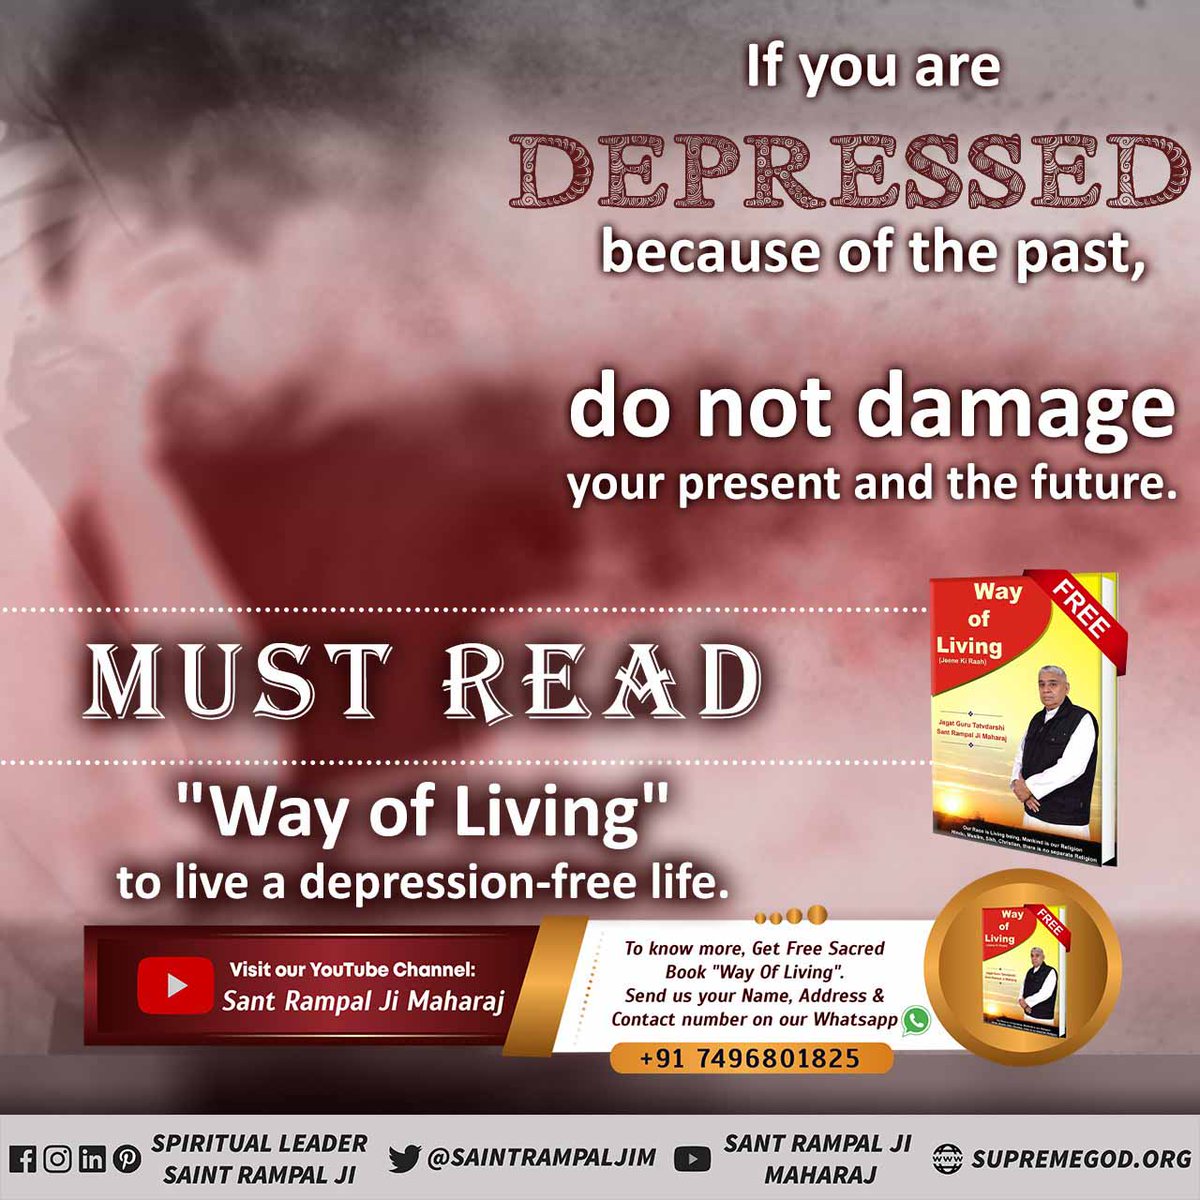 If you are depressed becouse of the past, don't damage your present and the future. Must read 'Way Of Living' to live a depression free life. #मानसिक_शांति_नहींतो_कुछनहीं